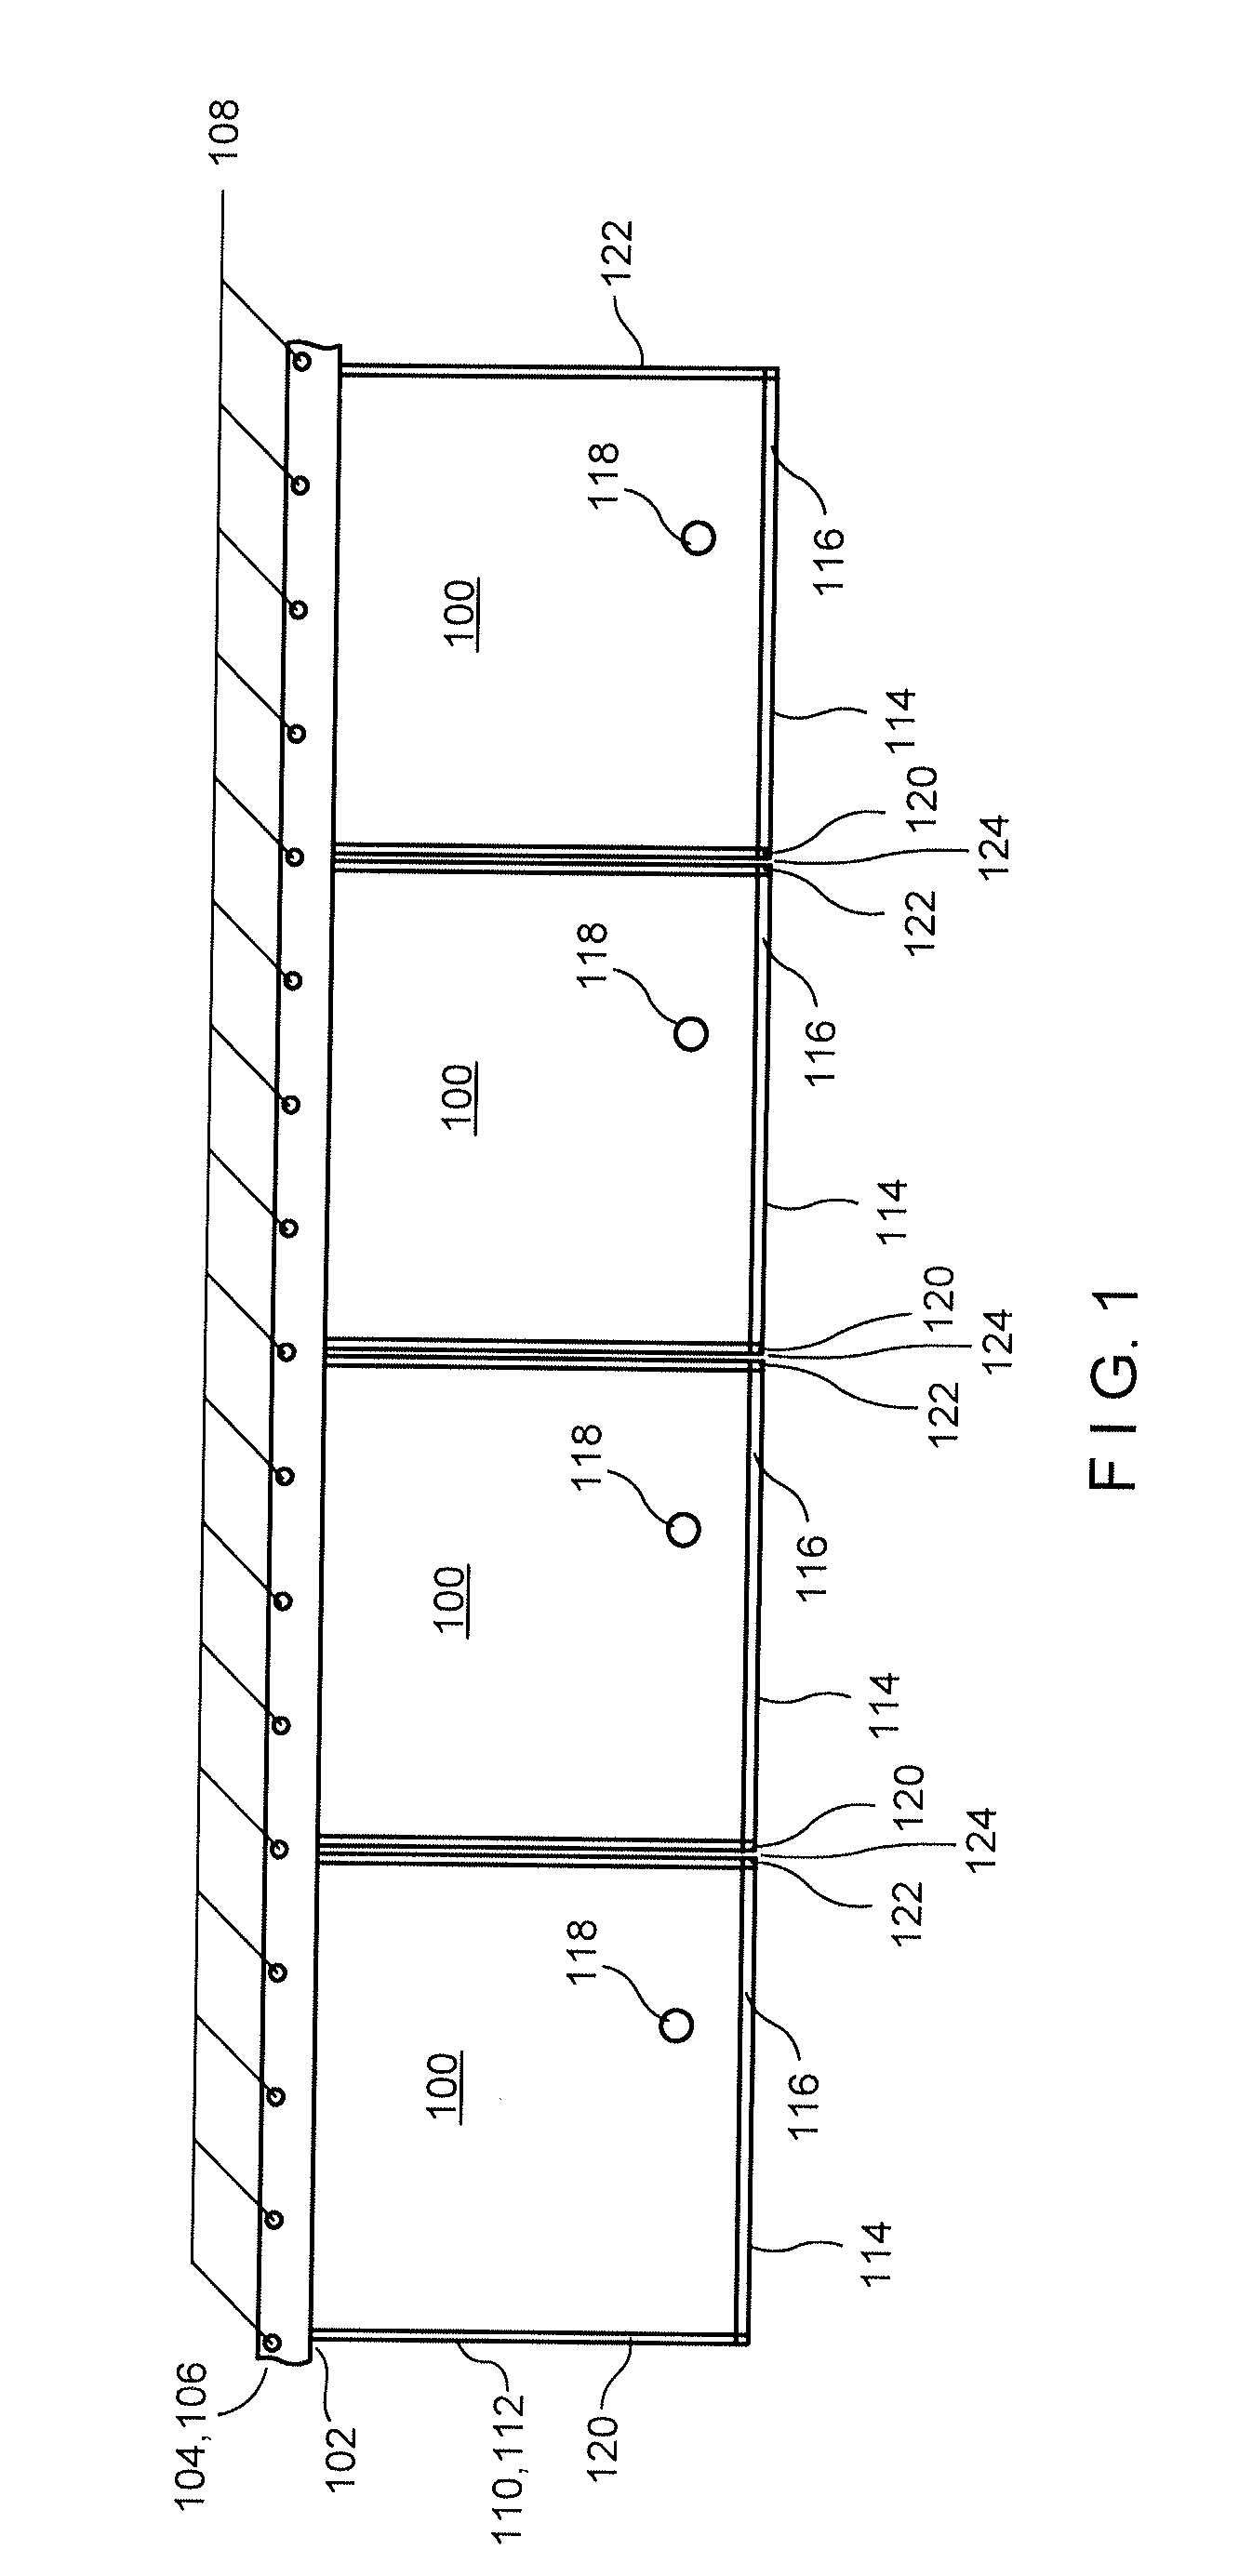 Form fill compression seal and cut-off packaging system for compressible goods